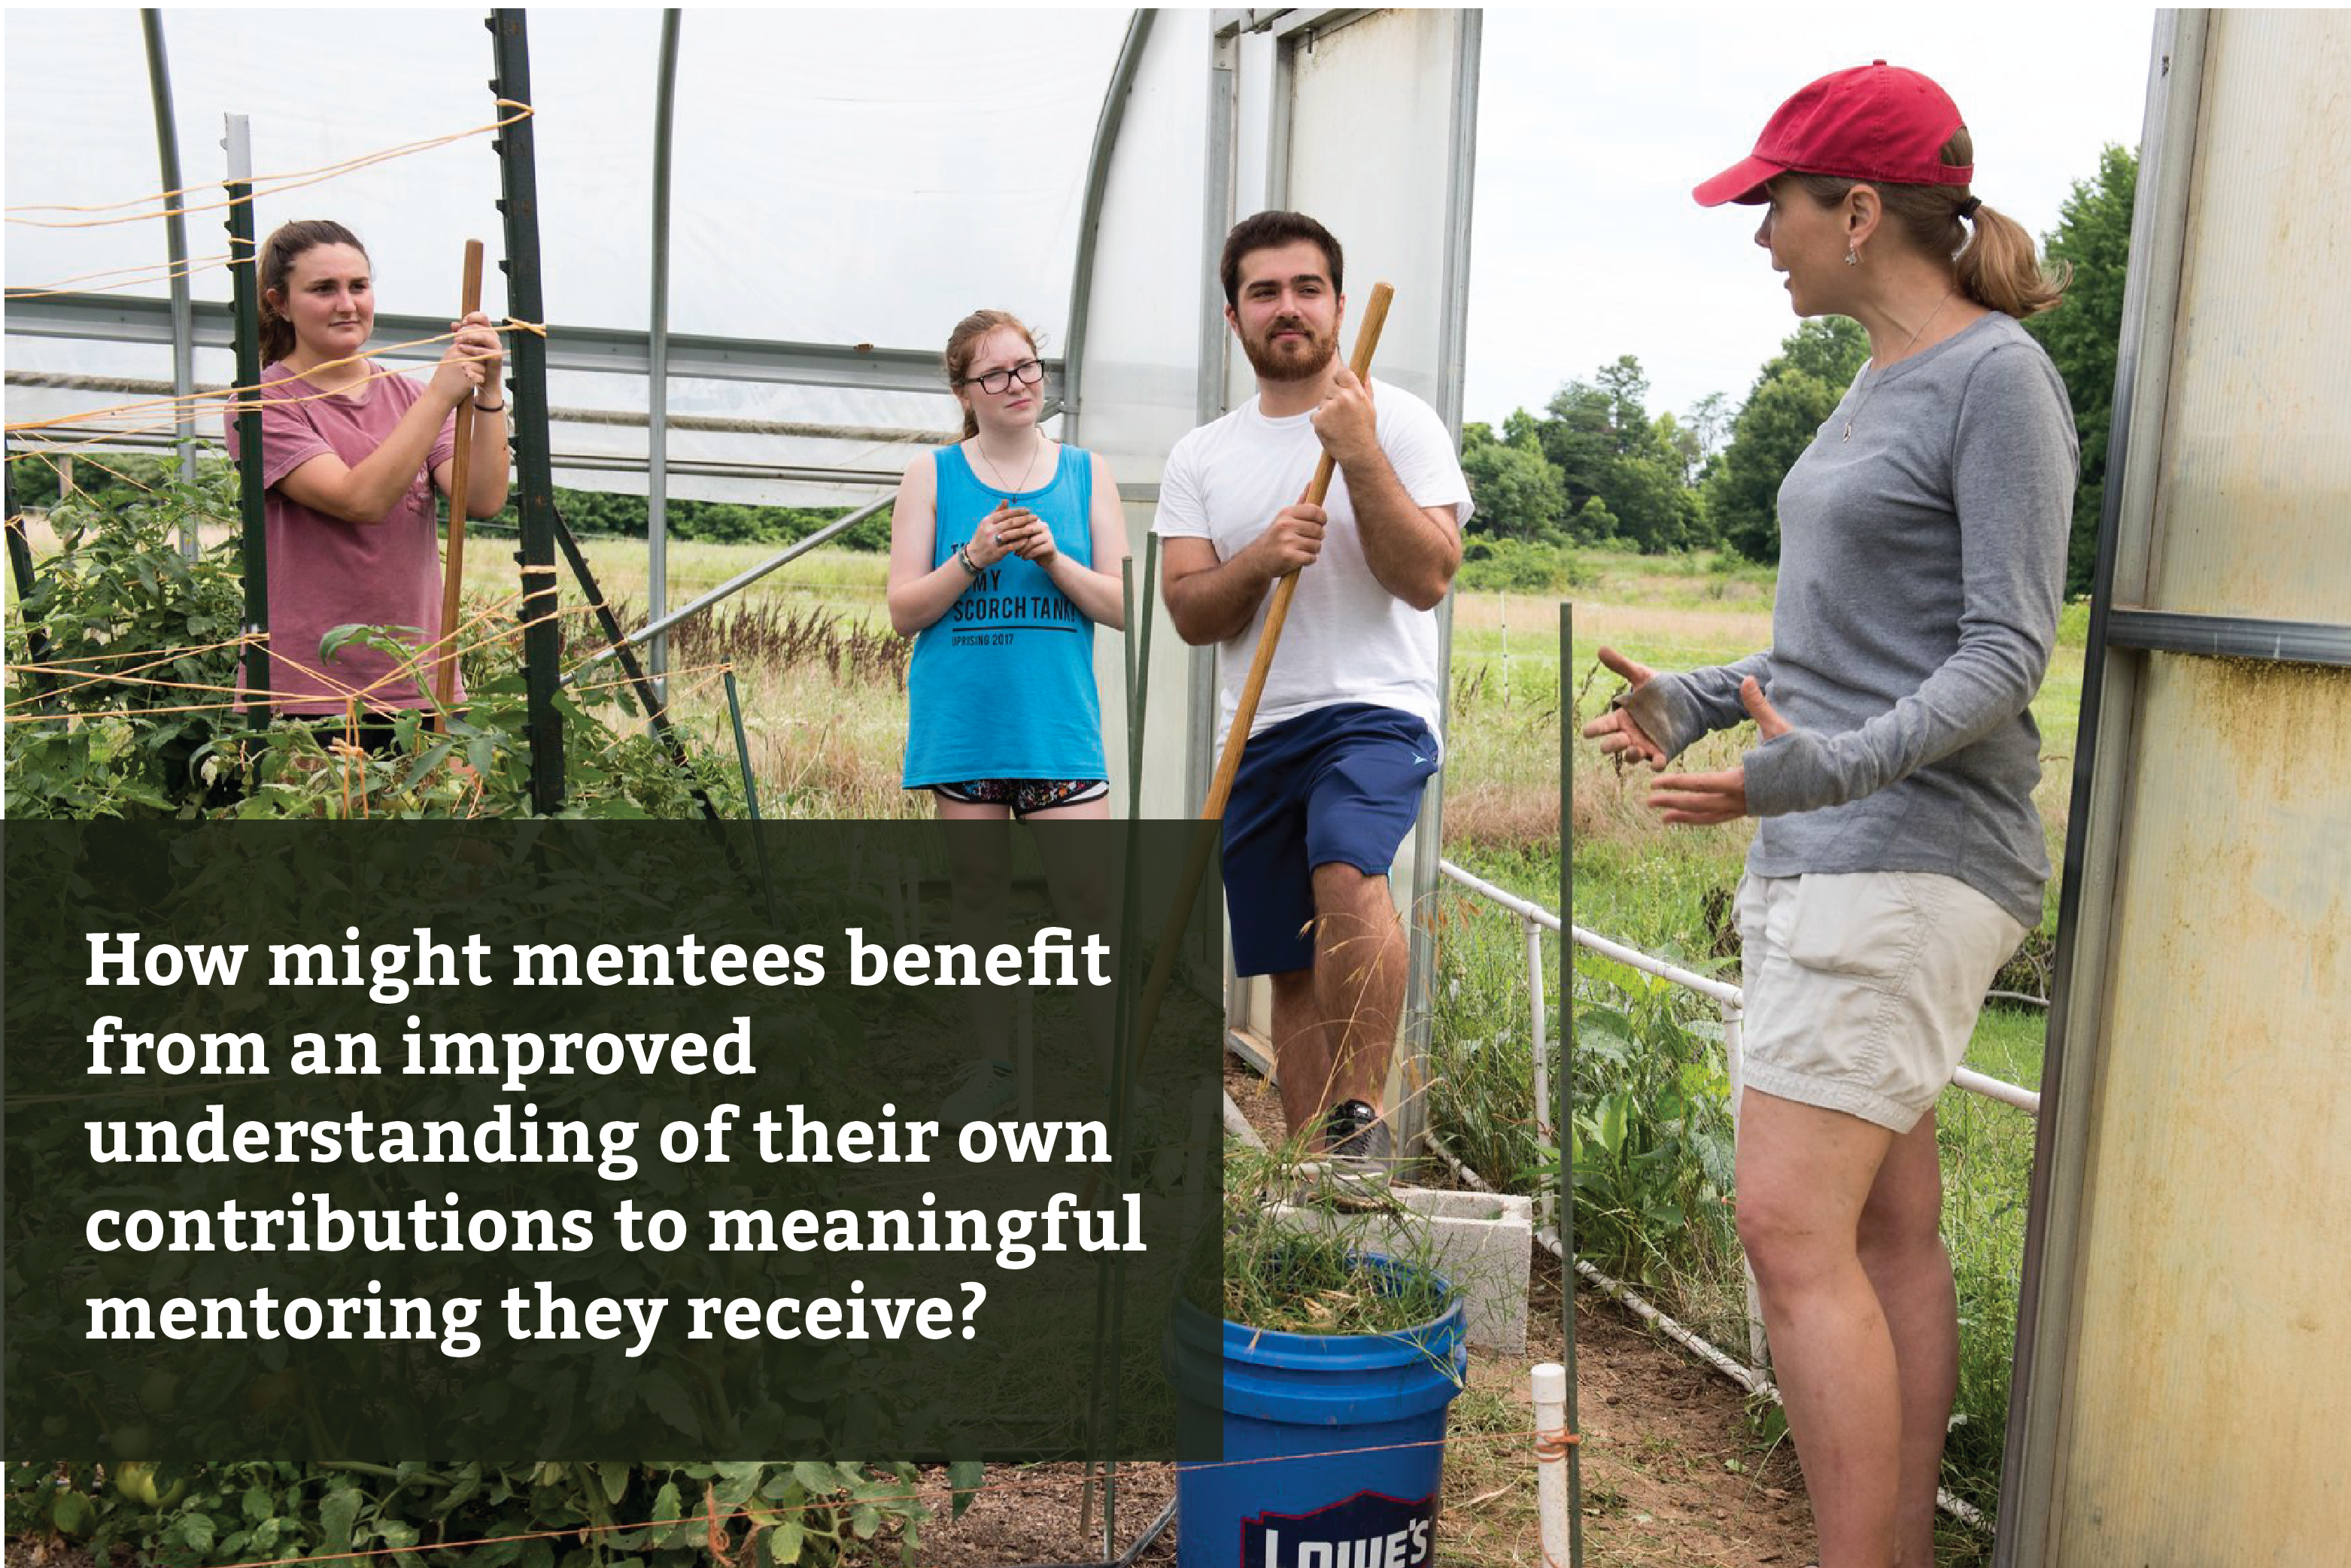 Three students and a woman stand together in a greenhouse. The students hold gardening tools, and they are listening to the woman. Text overlay reads "How might mentees benefit from an improved understanding of their own contributions to meaningful mentoring they receive?"